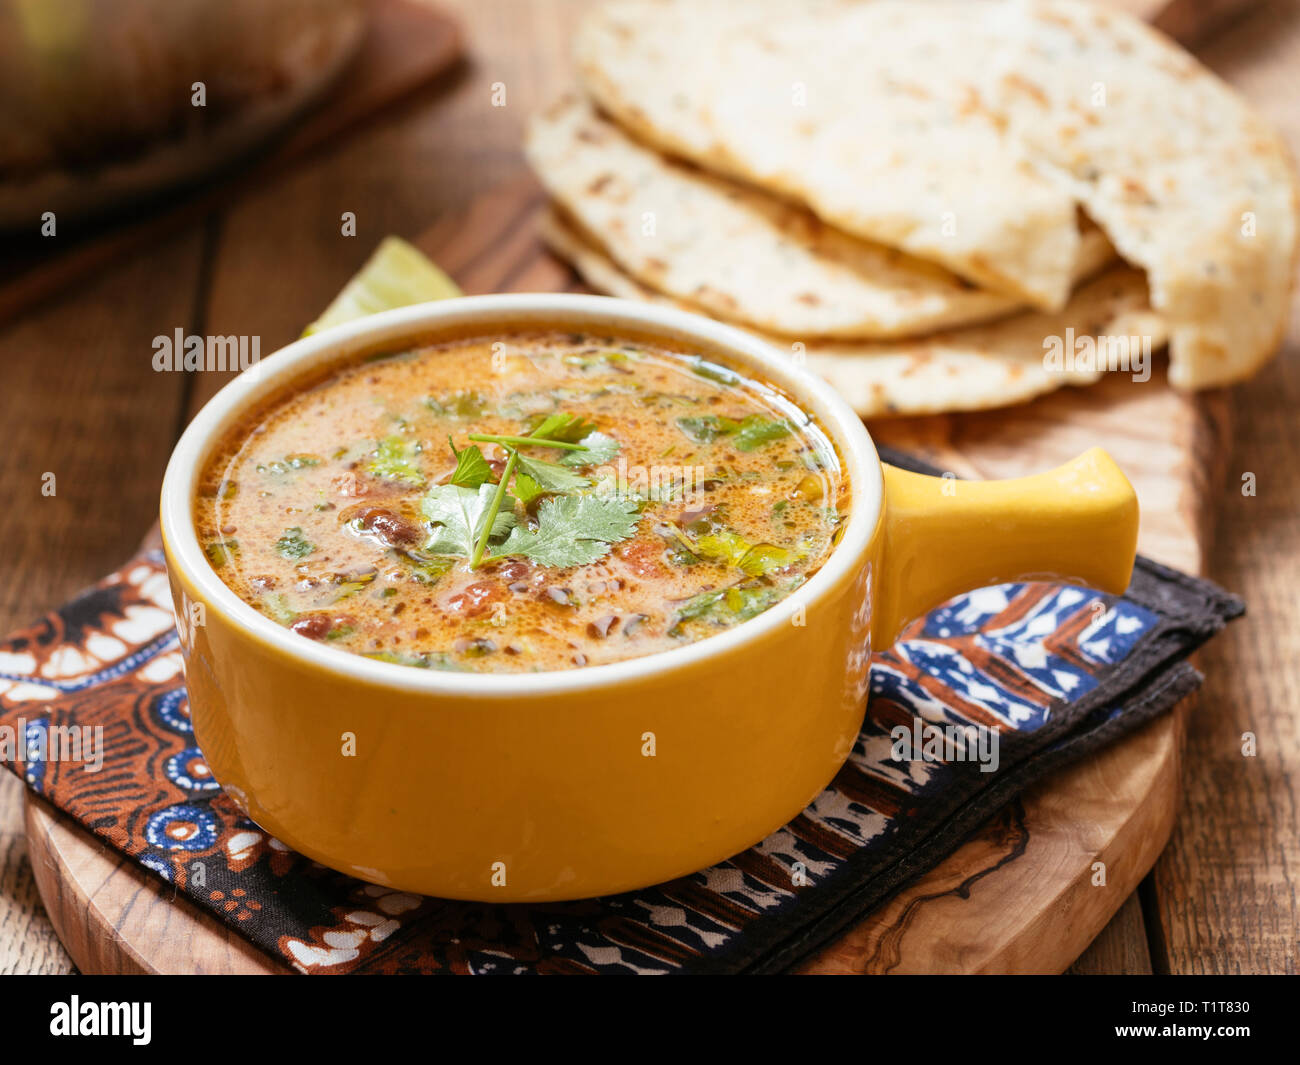 Curried Mung Bean Soup with Naan Breads Stock Photo